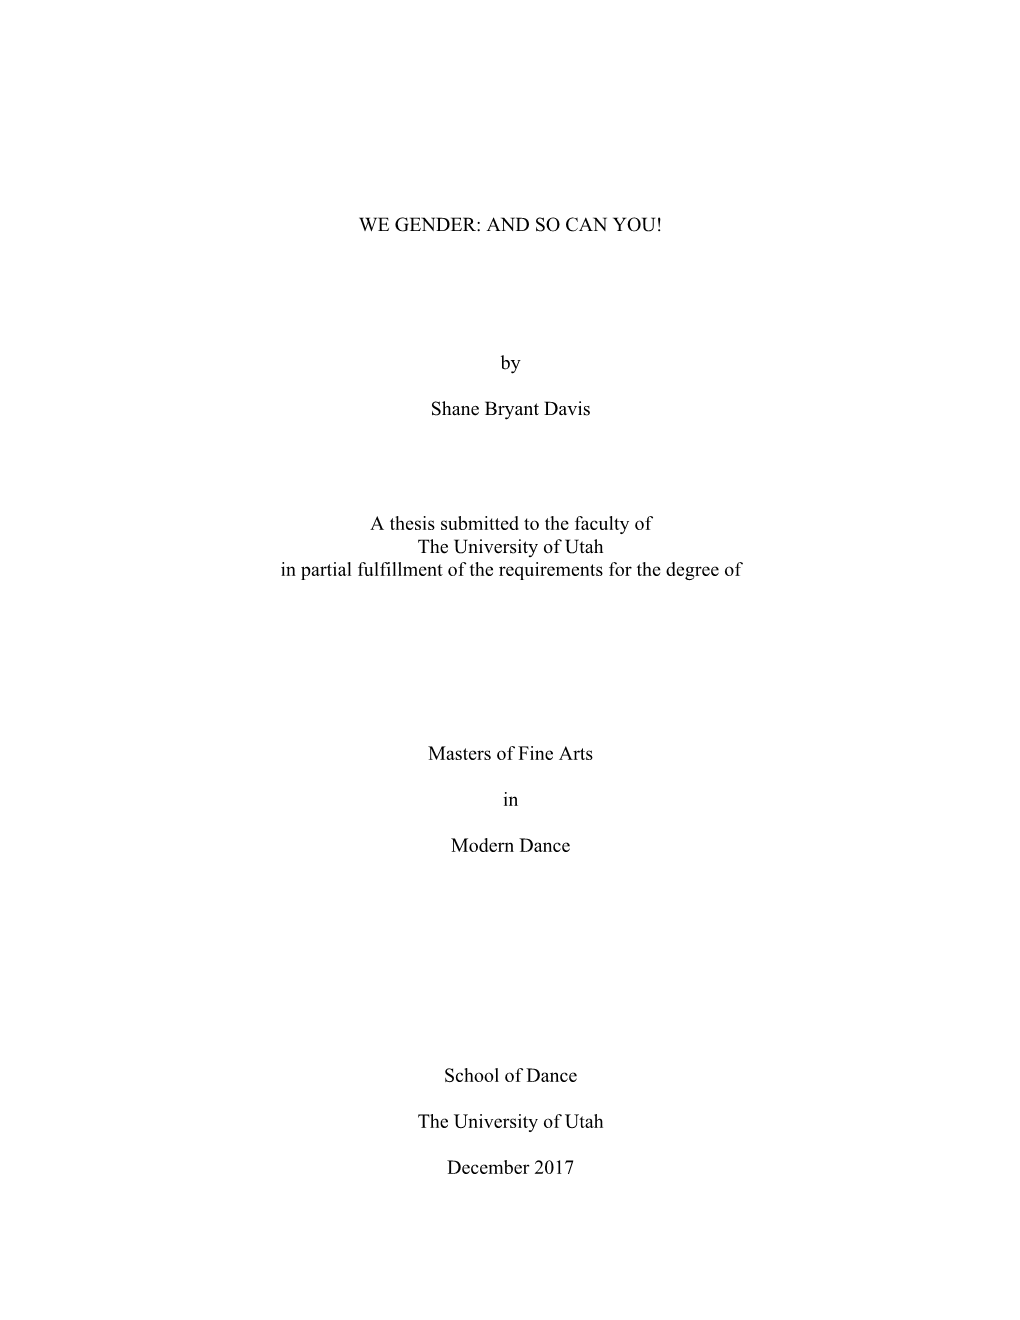 By Shane Bryant Davis a Thesis Submitted to the Faculty of The